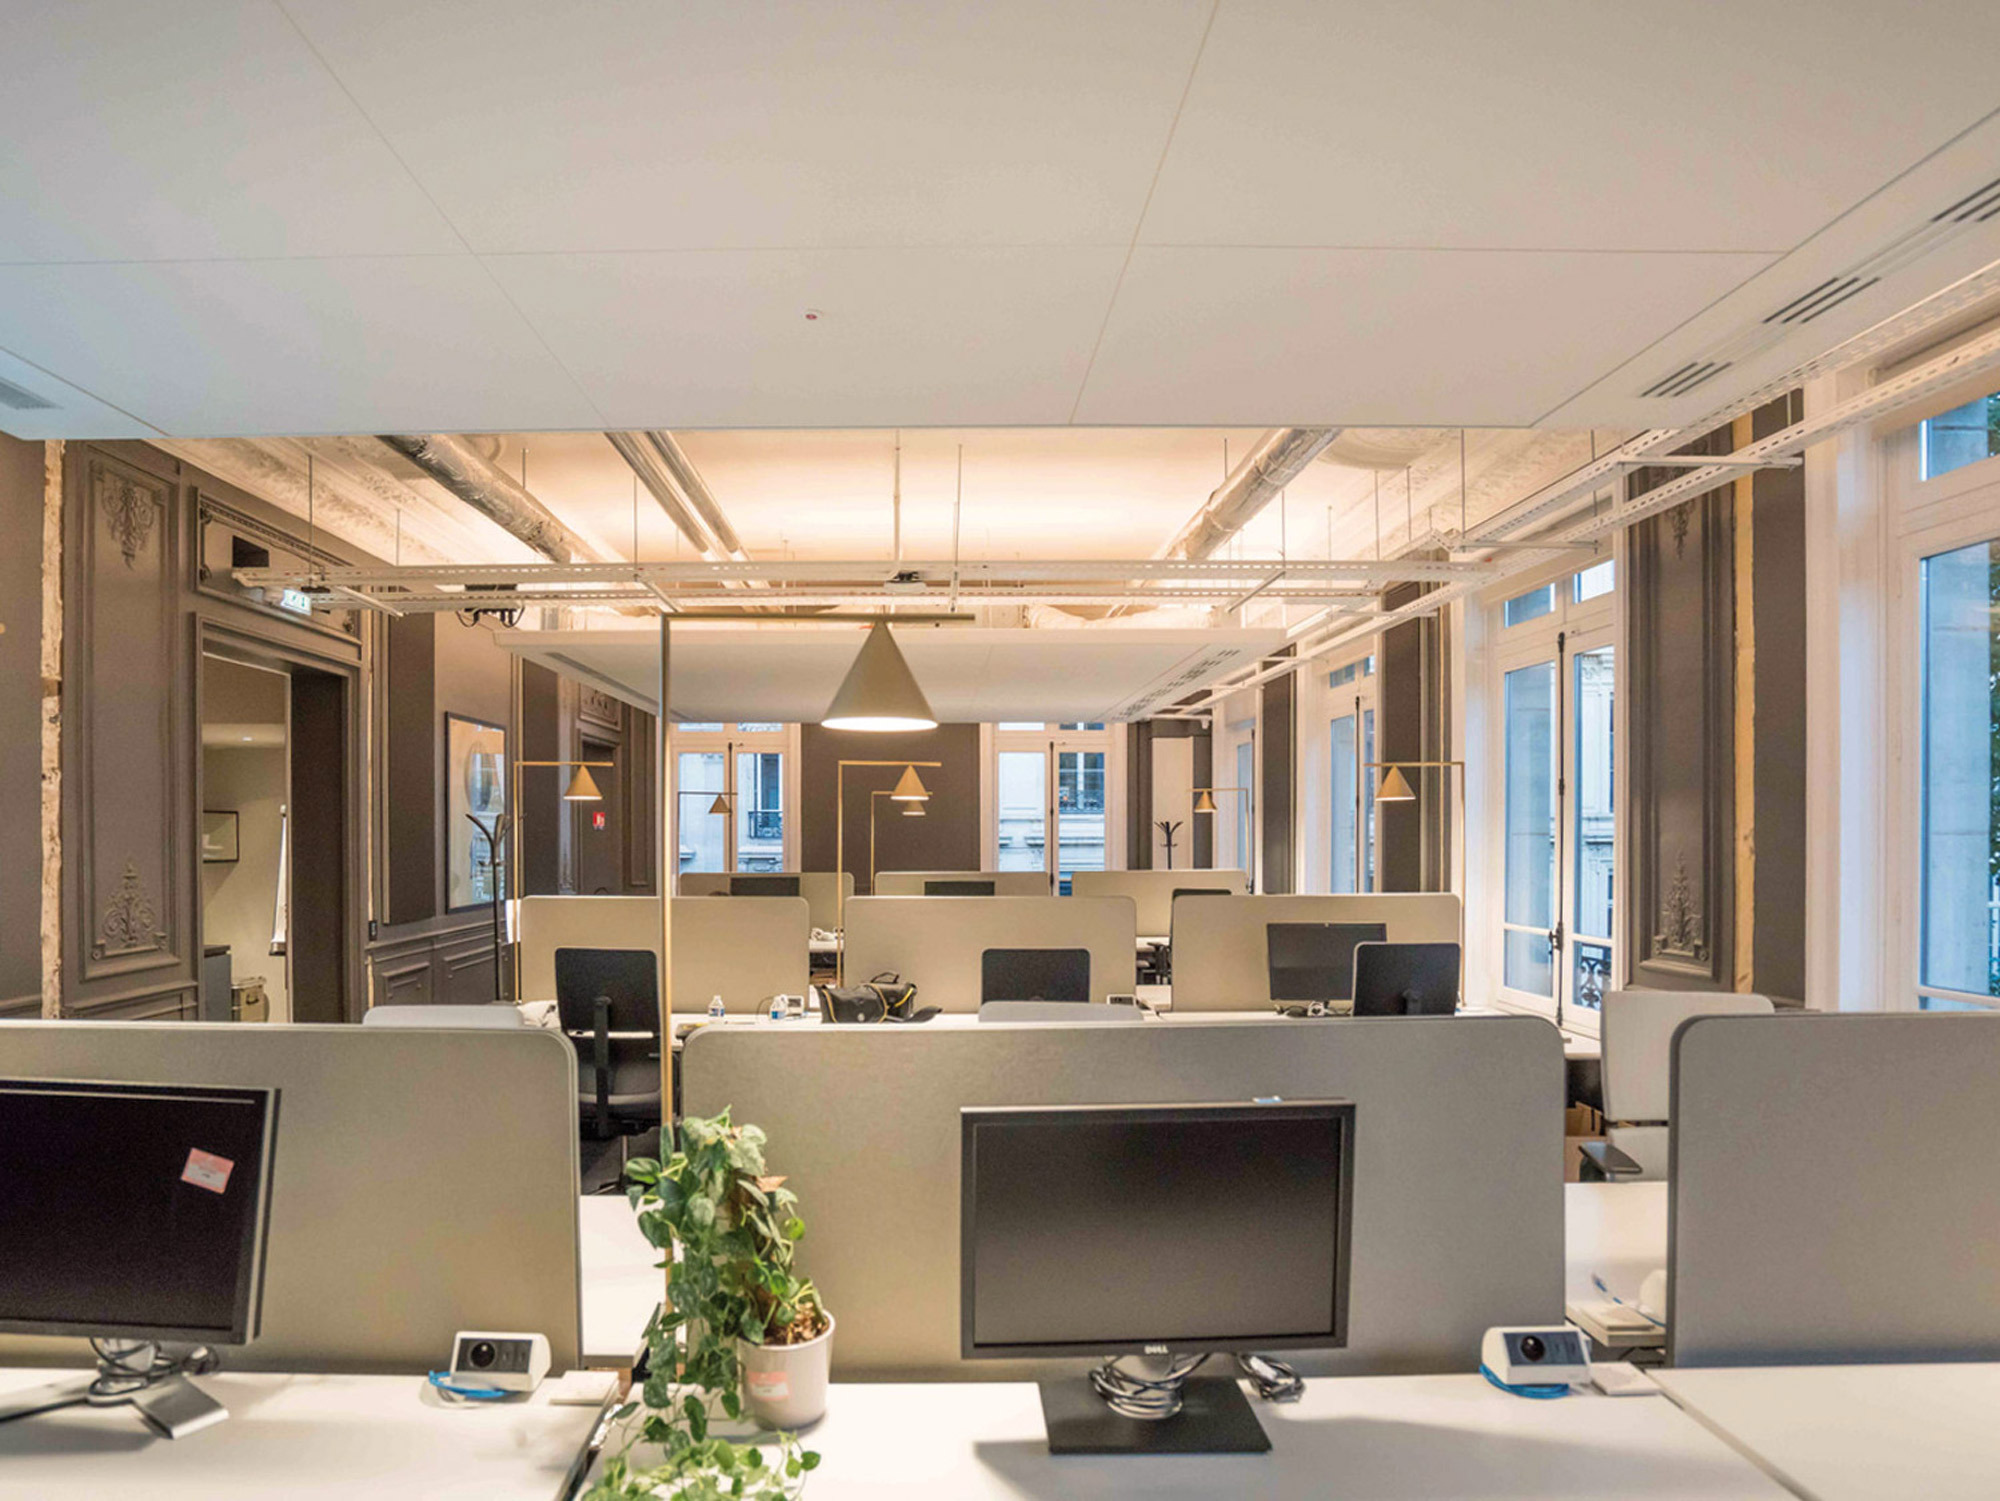 Contemporary office space featuring sleek workstation clusters, pendant lighting, exposed ductwork, and large windows fostering natural light. The color palette is neutral with elegant architectural moldings emphasizing historical charm amidst modern furnishings.